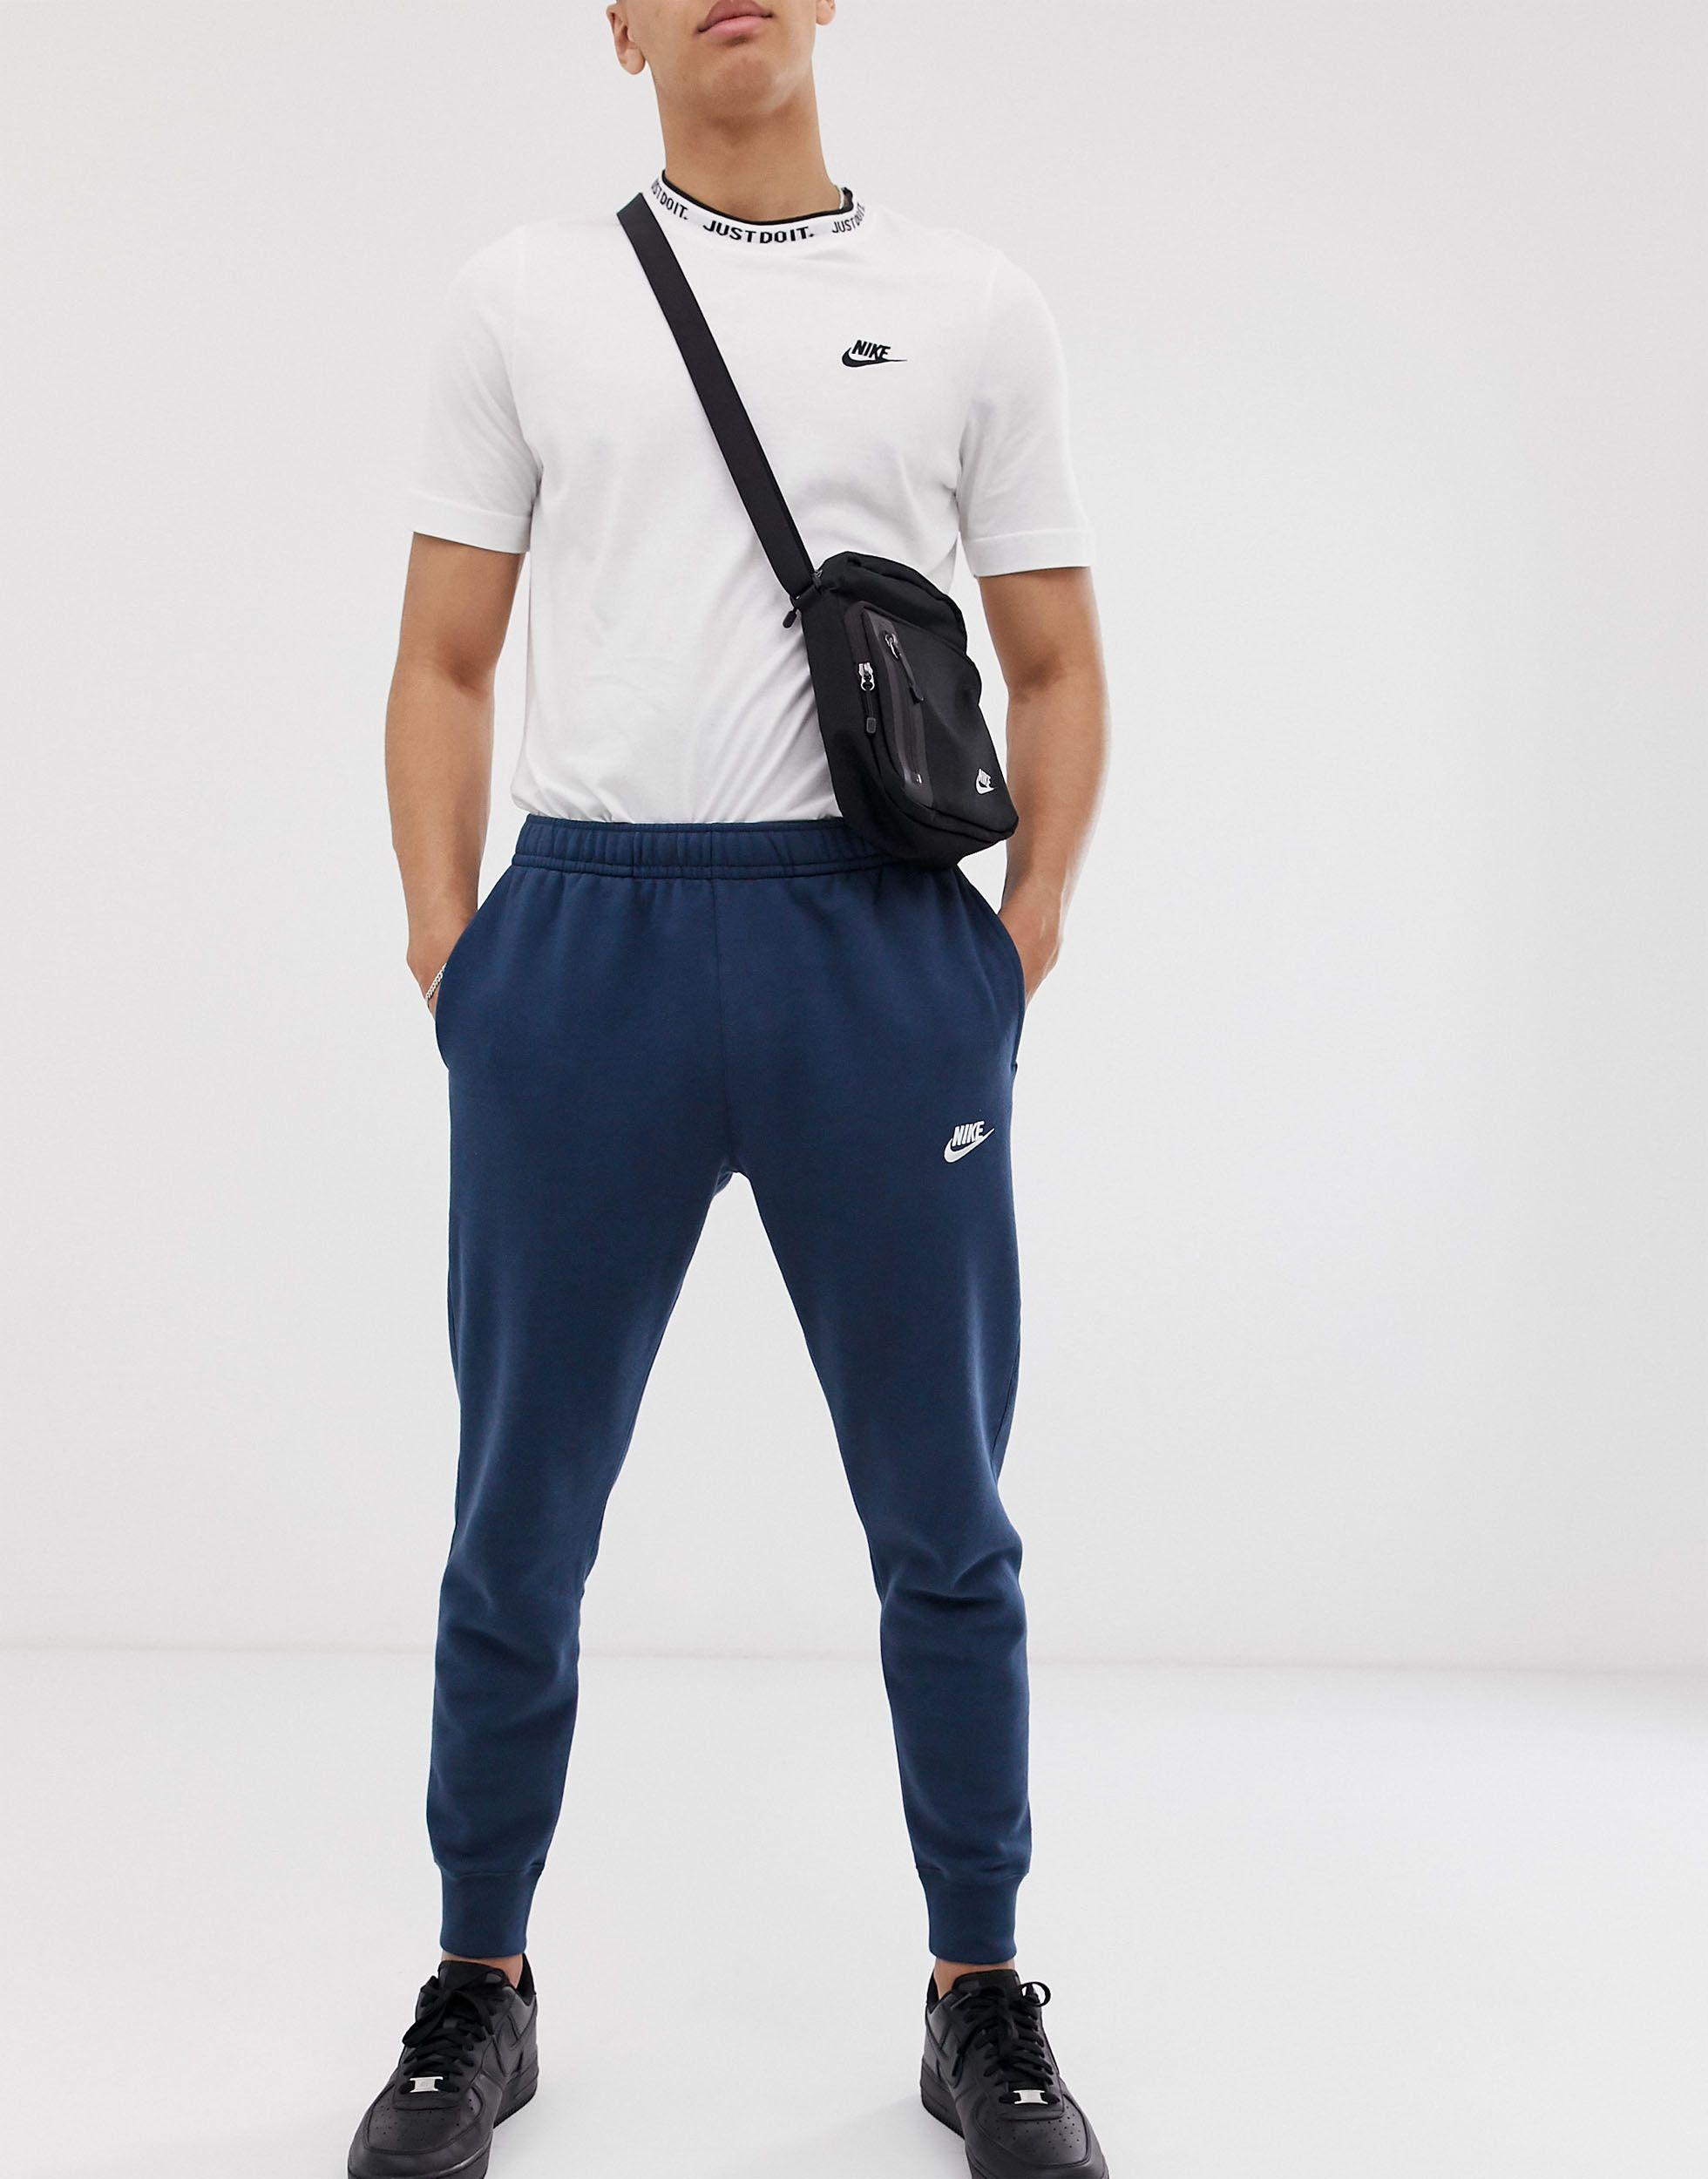 Nike Cotton Cuffed Club jogger in Navy (Blue) for Men - Lyst